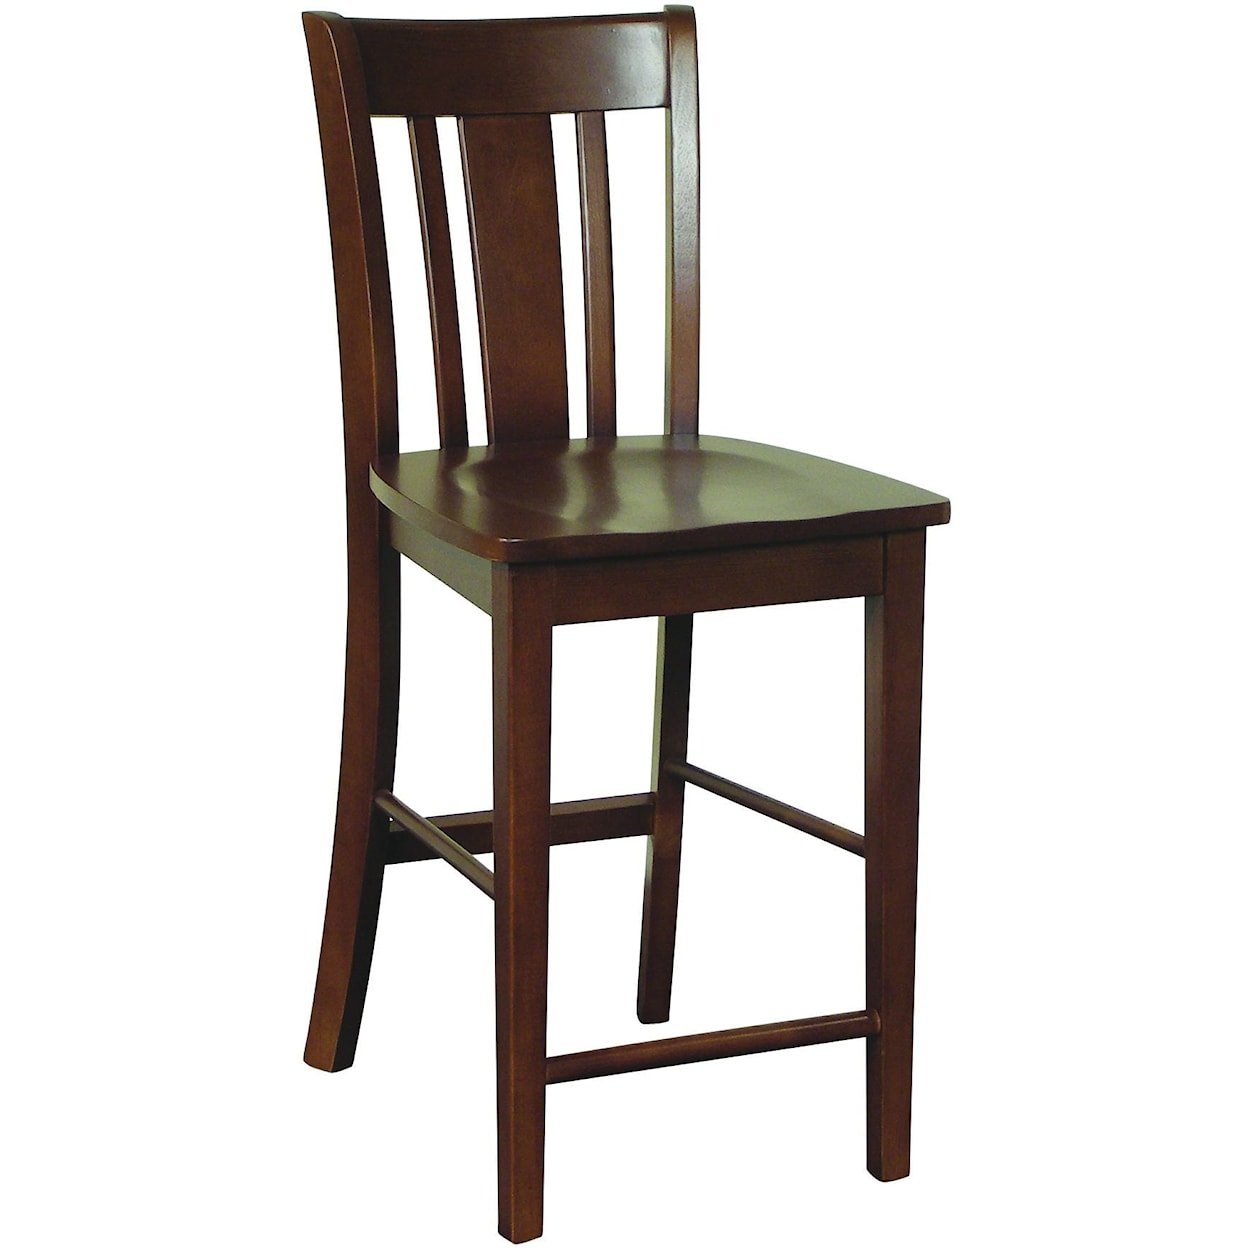 John Thomas Dining Essentials San Remo Dining Chair in Expresso